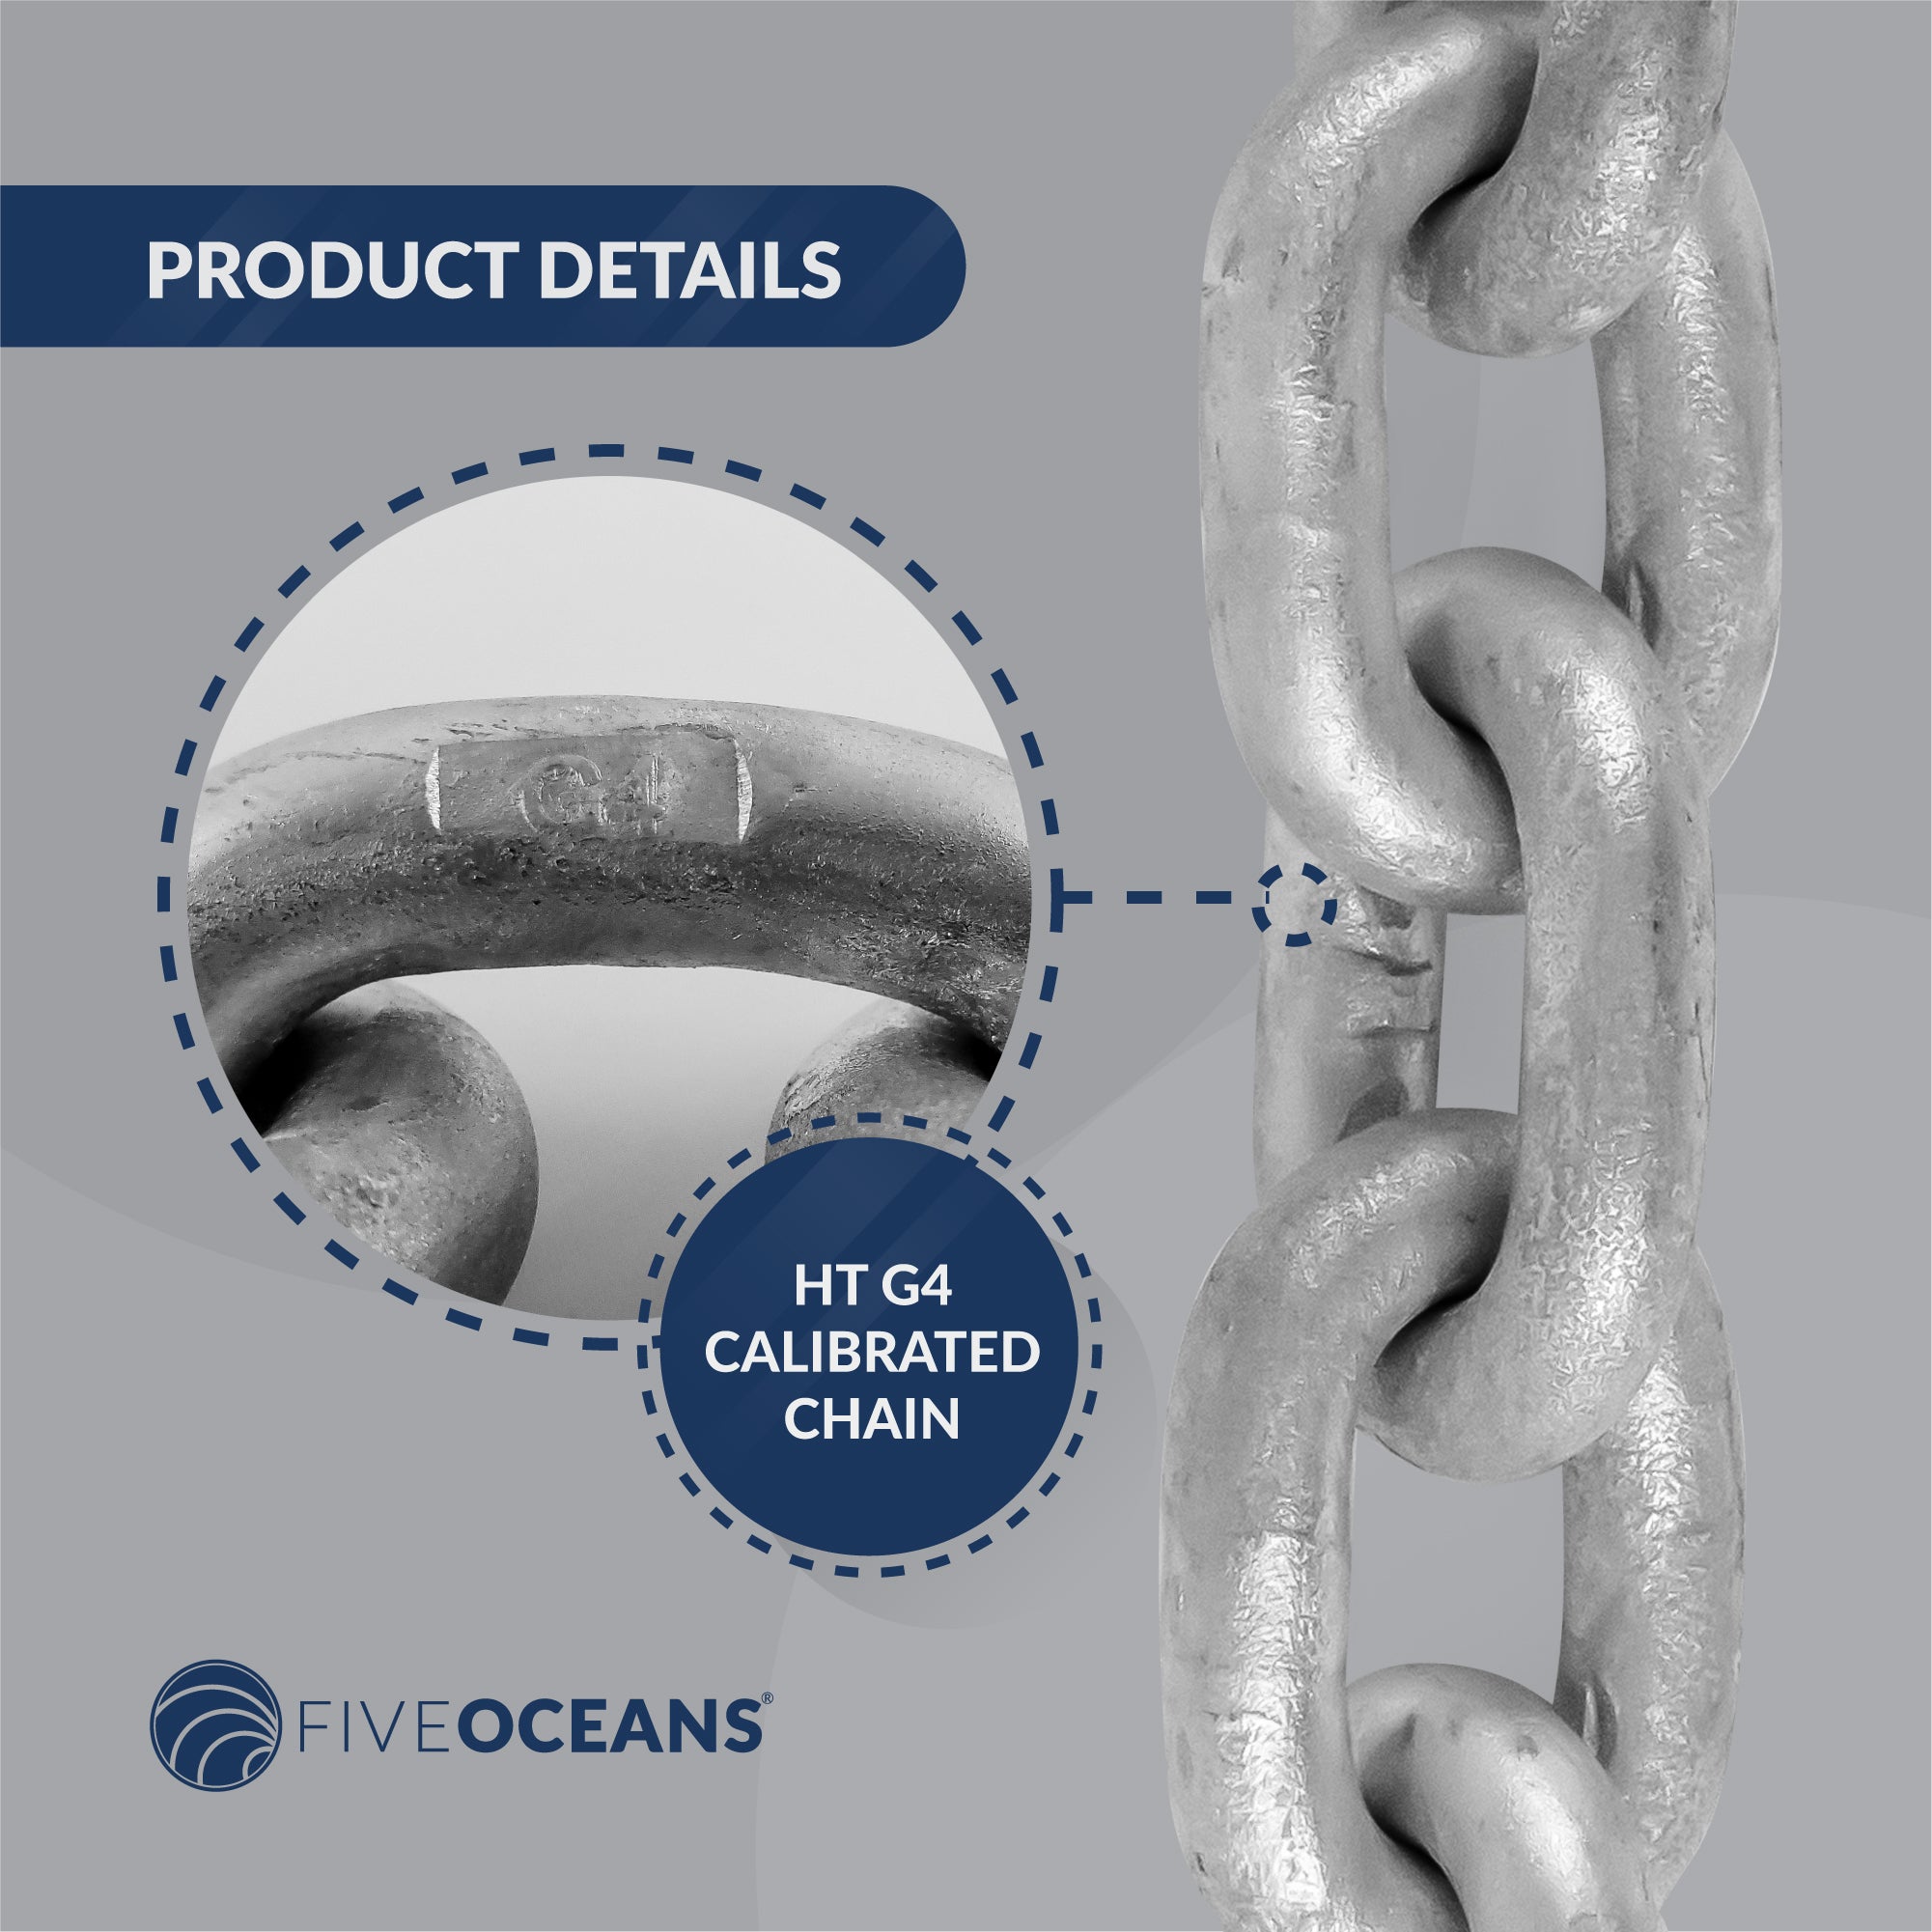 Boat Anchor Lead Chain with Shackles, 5/16" x 10', HTG4 Galvanized Steel - FO4490-G10